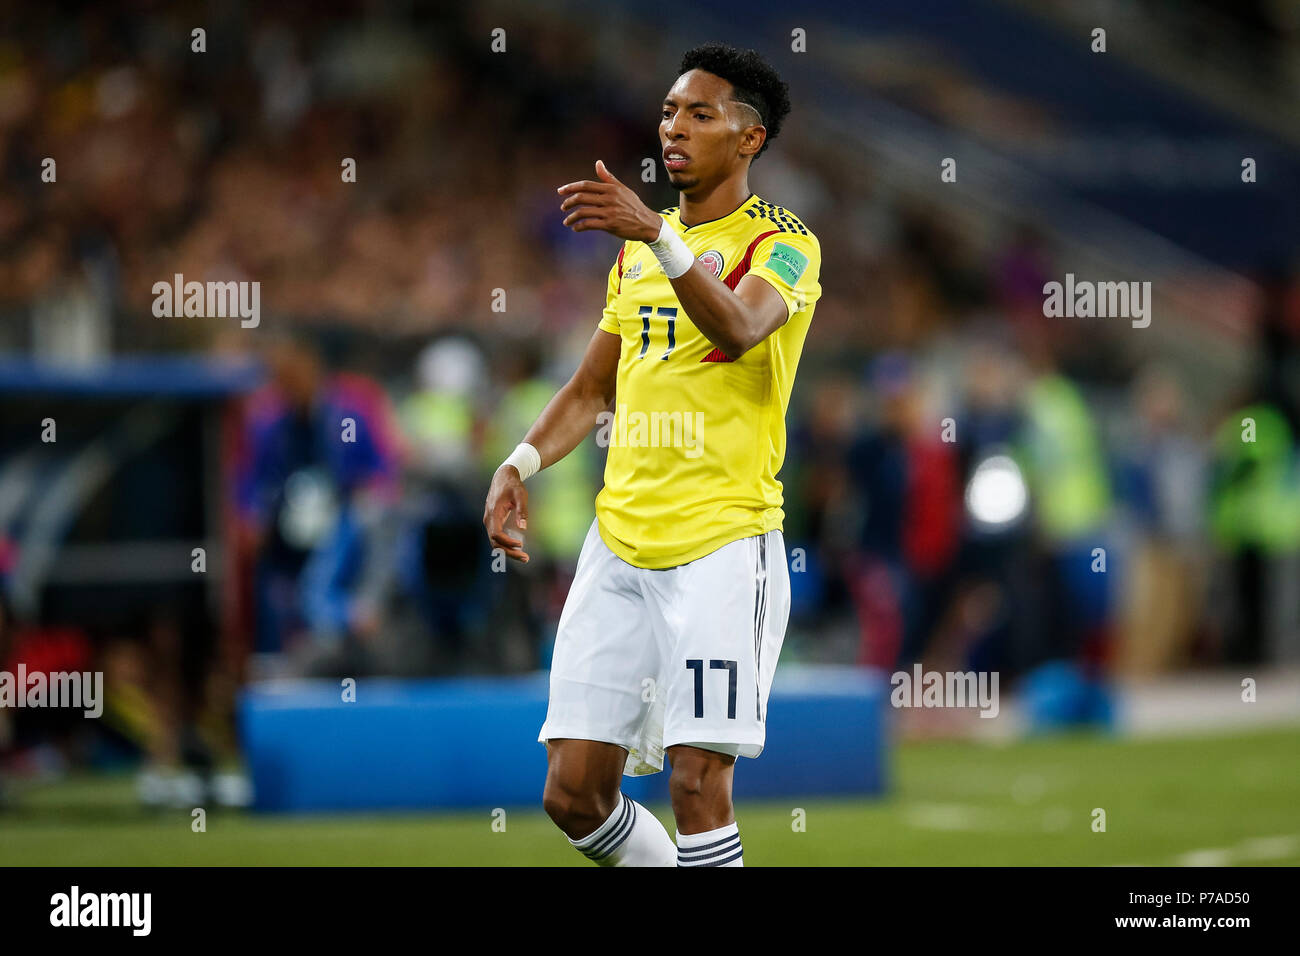 Moscow, Russia. 3rd July, 2018. Johan Mojica of Colombia during the 2018 FIFA World Cup Round of 16 match between Colombia and England at Spartak Stadium on July 3rd 2018 in Moscow, Russia. (Photo by Daniel Chesterton/phcimages.com) Credit: PHC Images/Alamy Live News Stock Photo